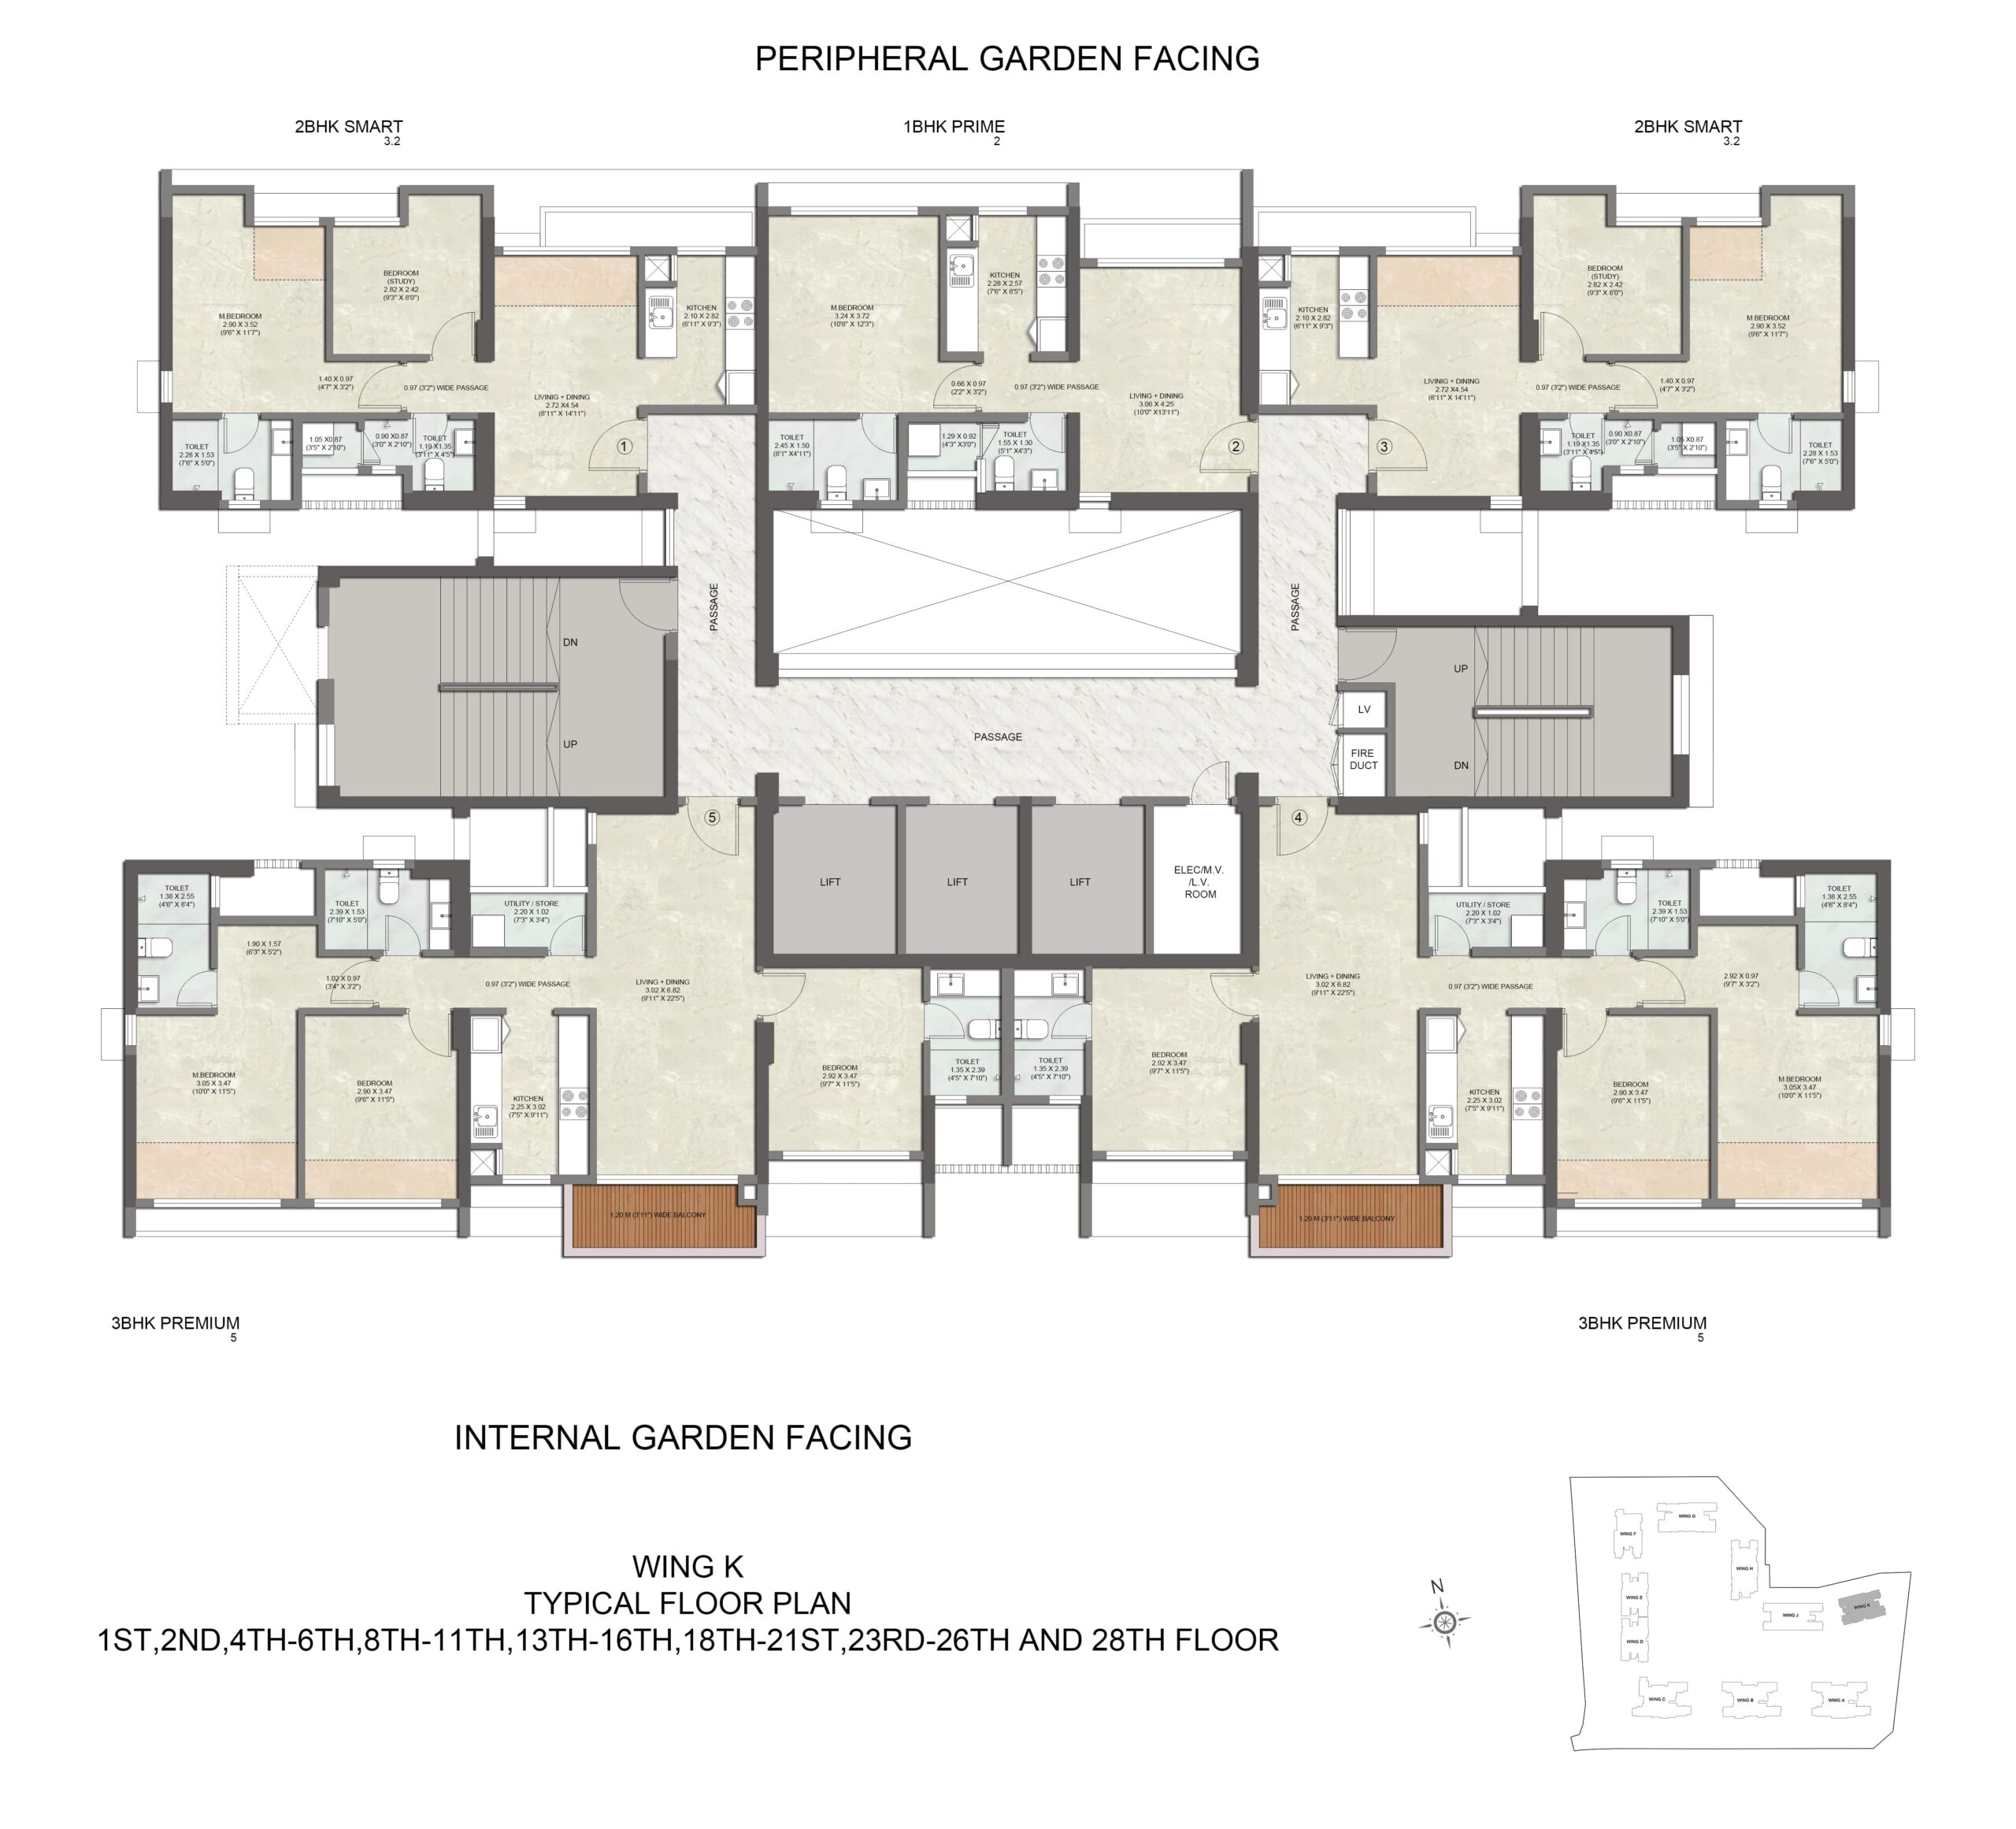 WING K_TYPICAL FLOOR PLAN_1ST TO 28TH FLOOR